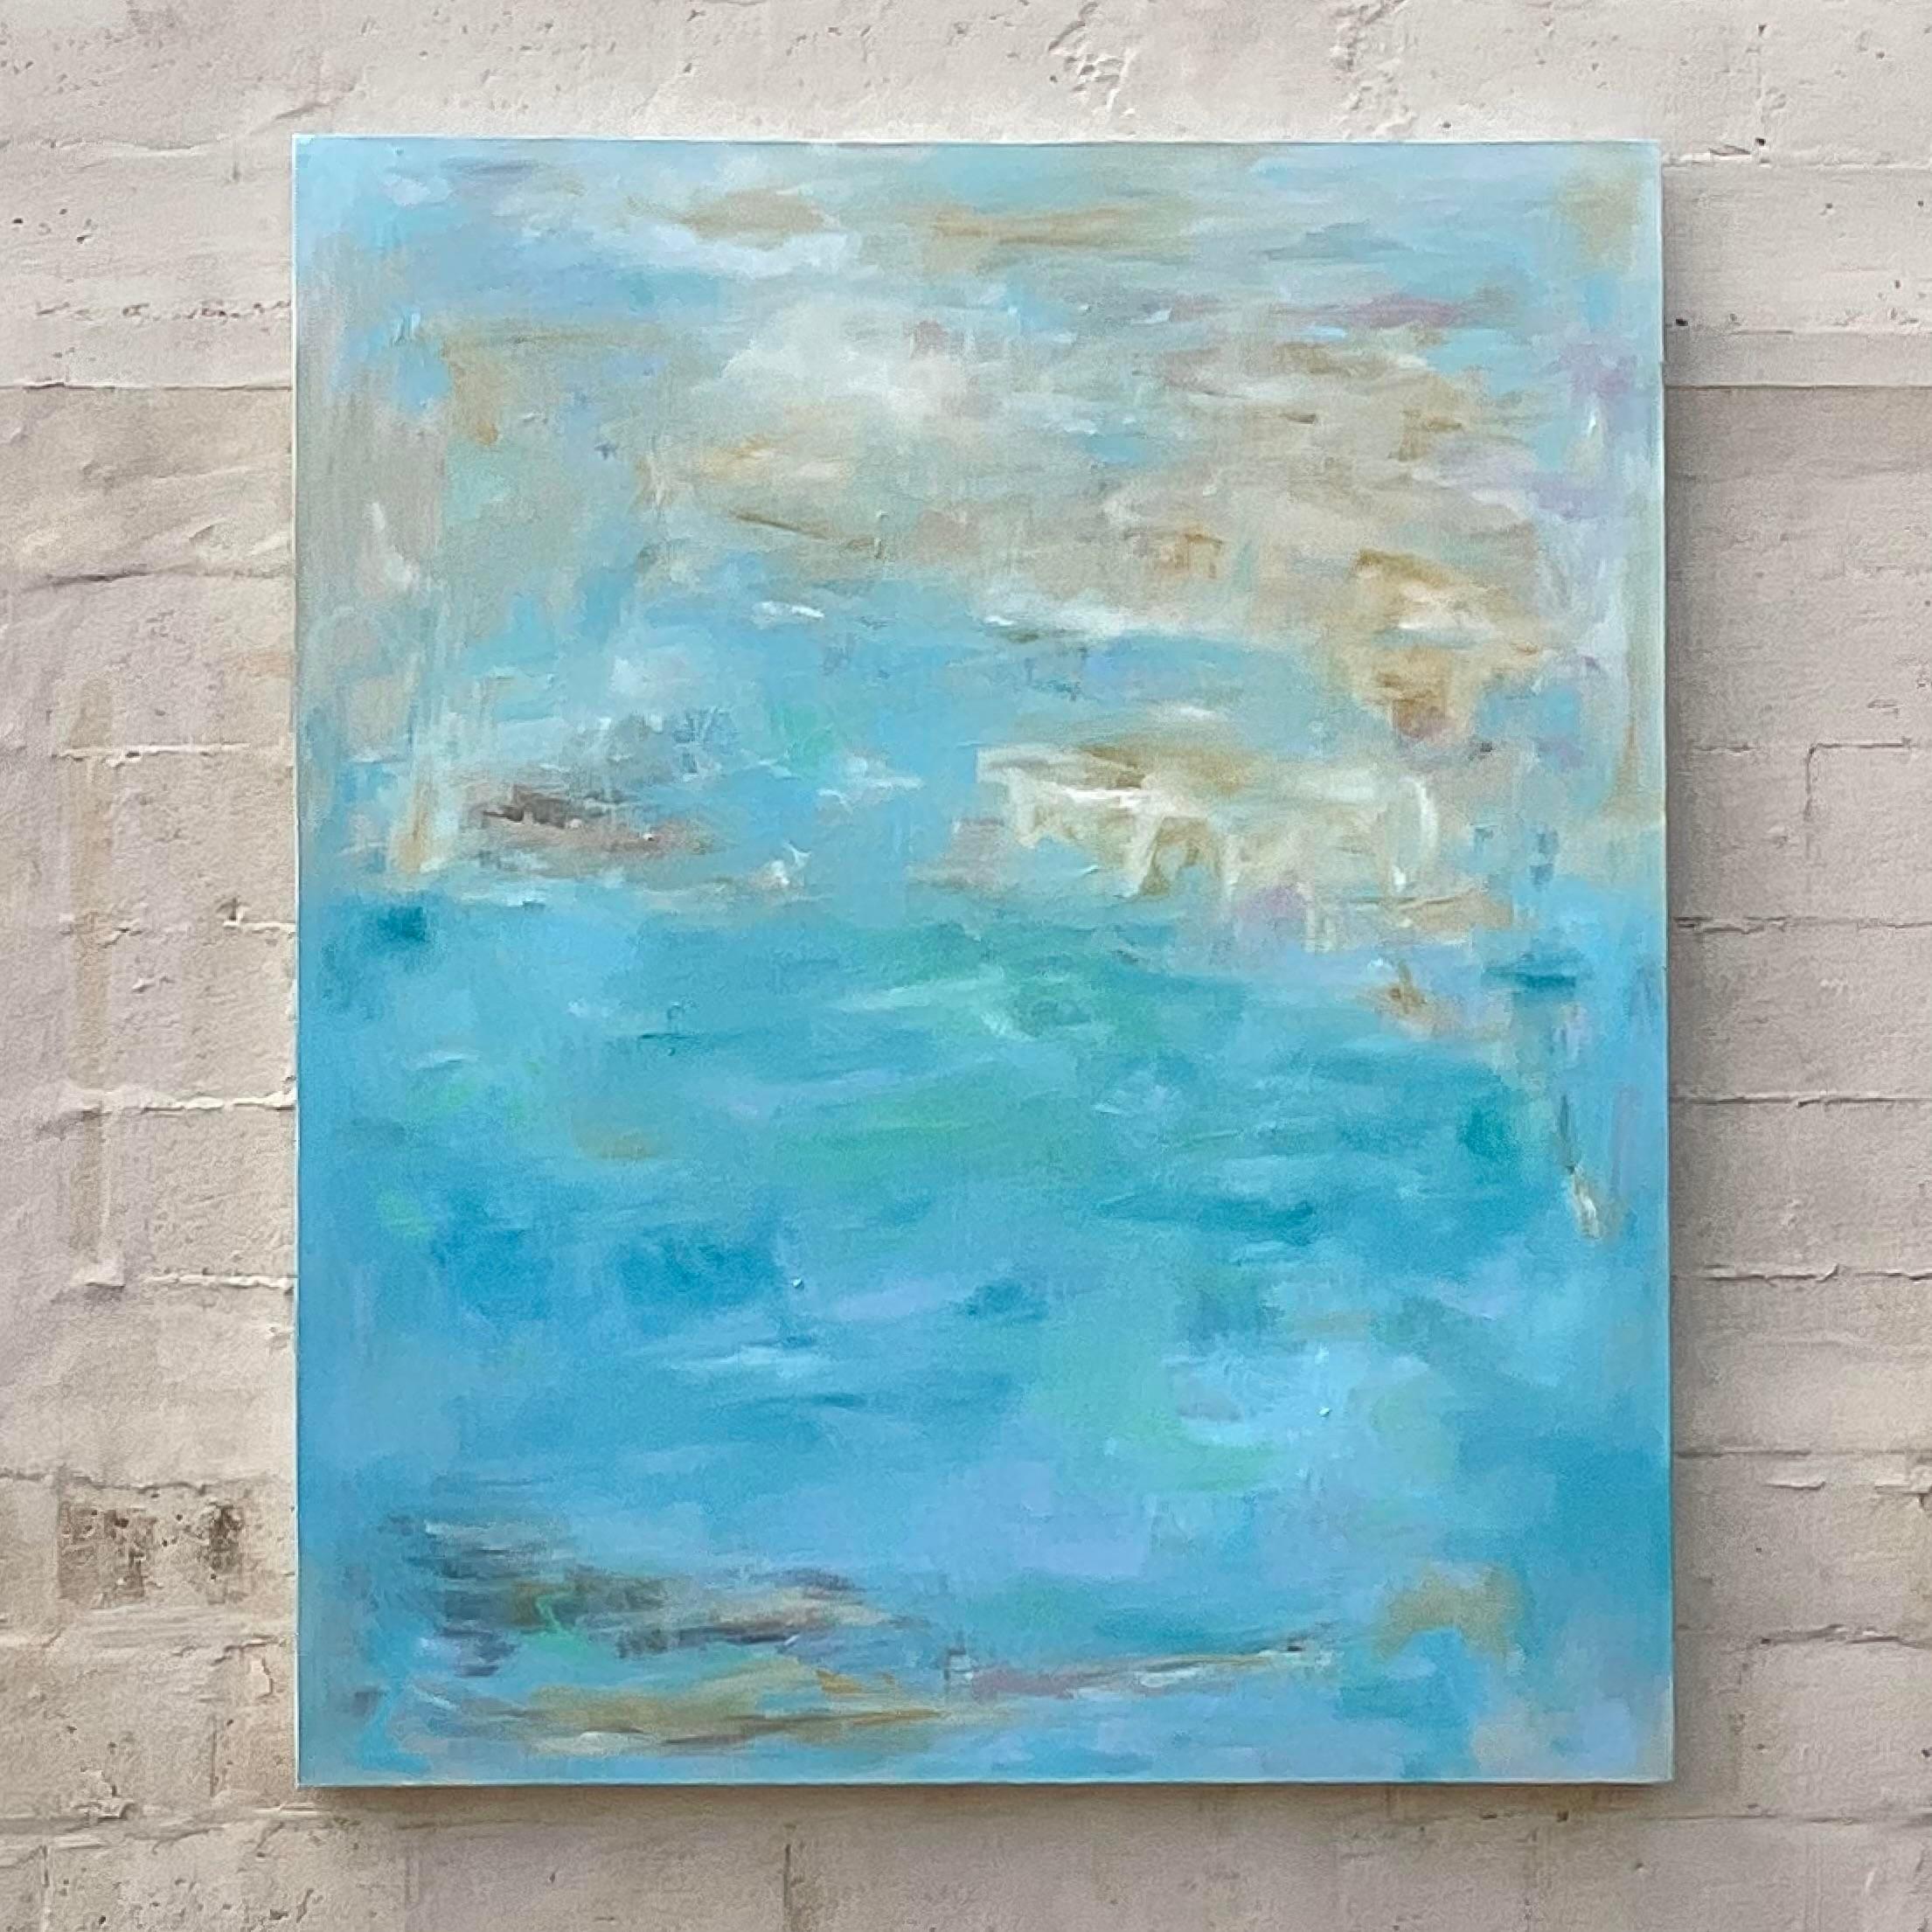 A fabulous vintage Boho original painting on canvas. A brilliant Abstract composition signed by the artist. Beautiful shades of blue and sand colors. Acquired from a Palm Beach estate.